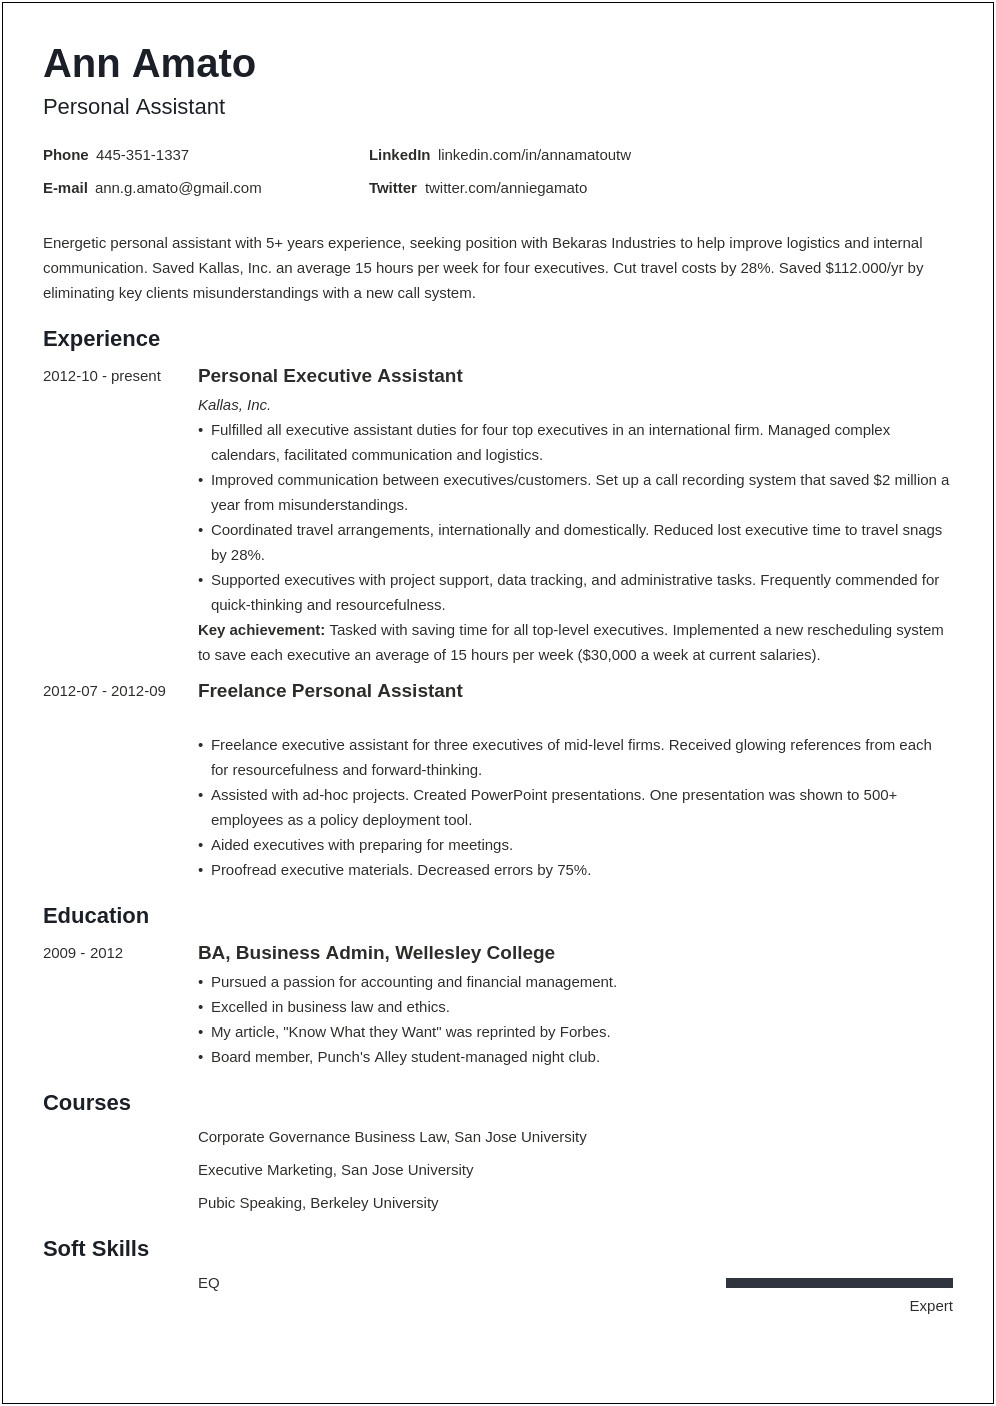 Best Format To Save Resume